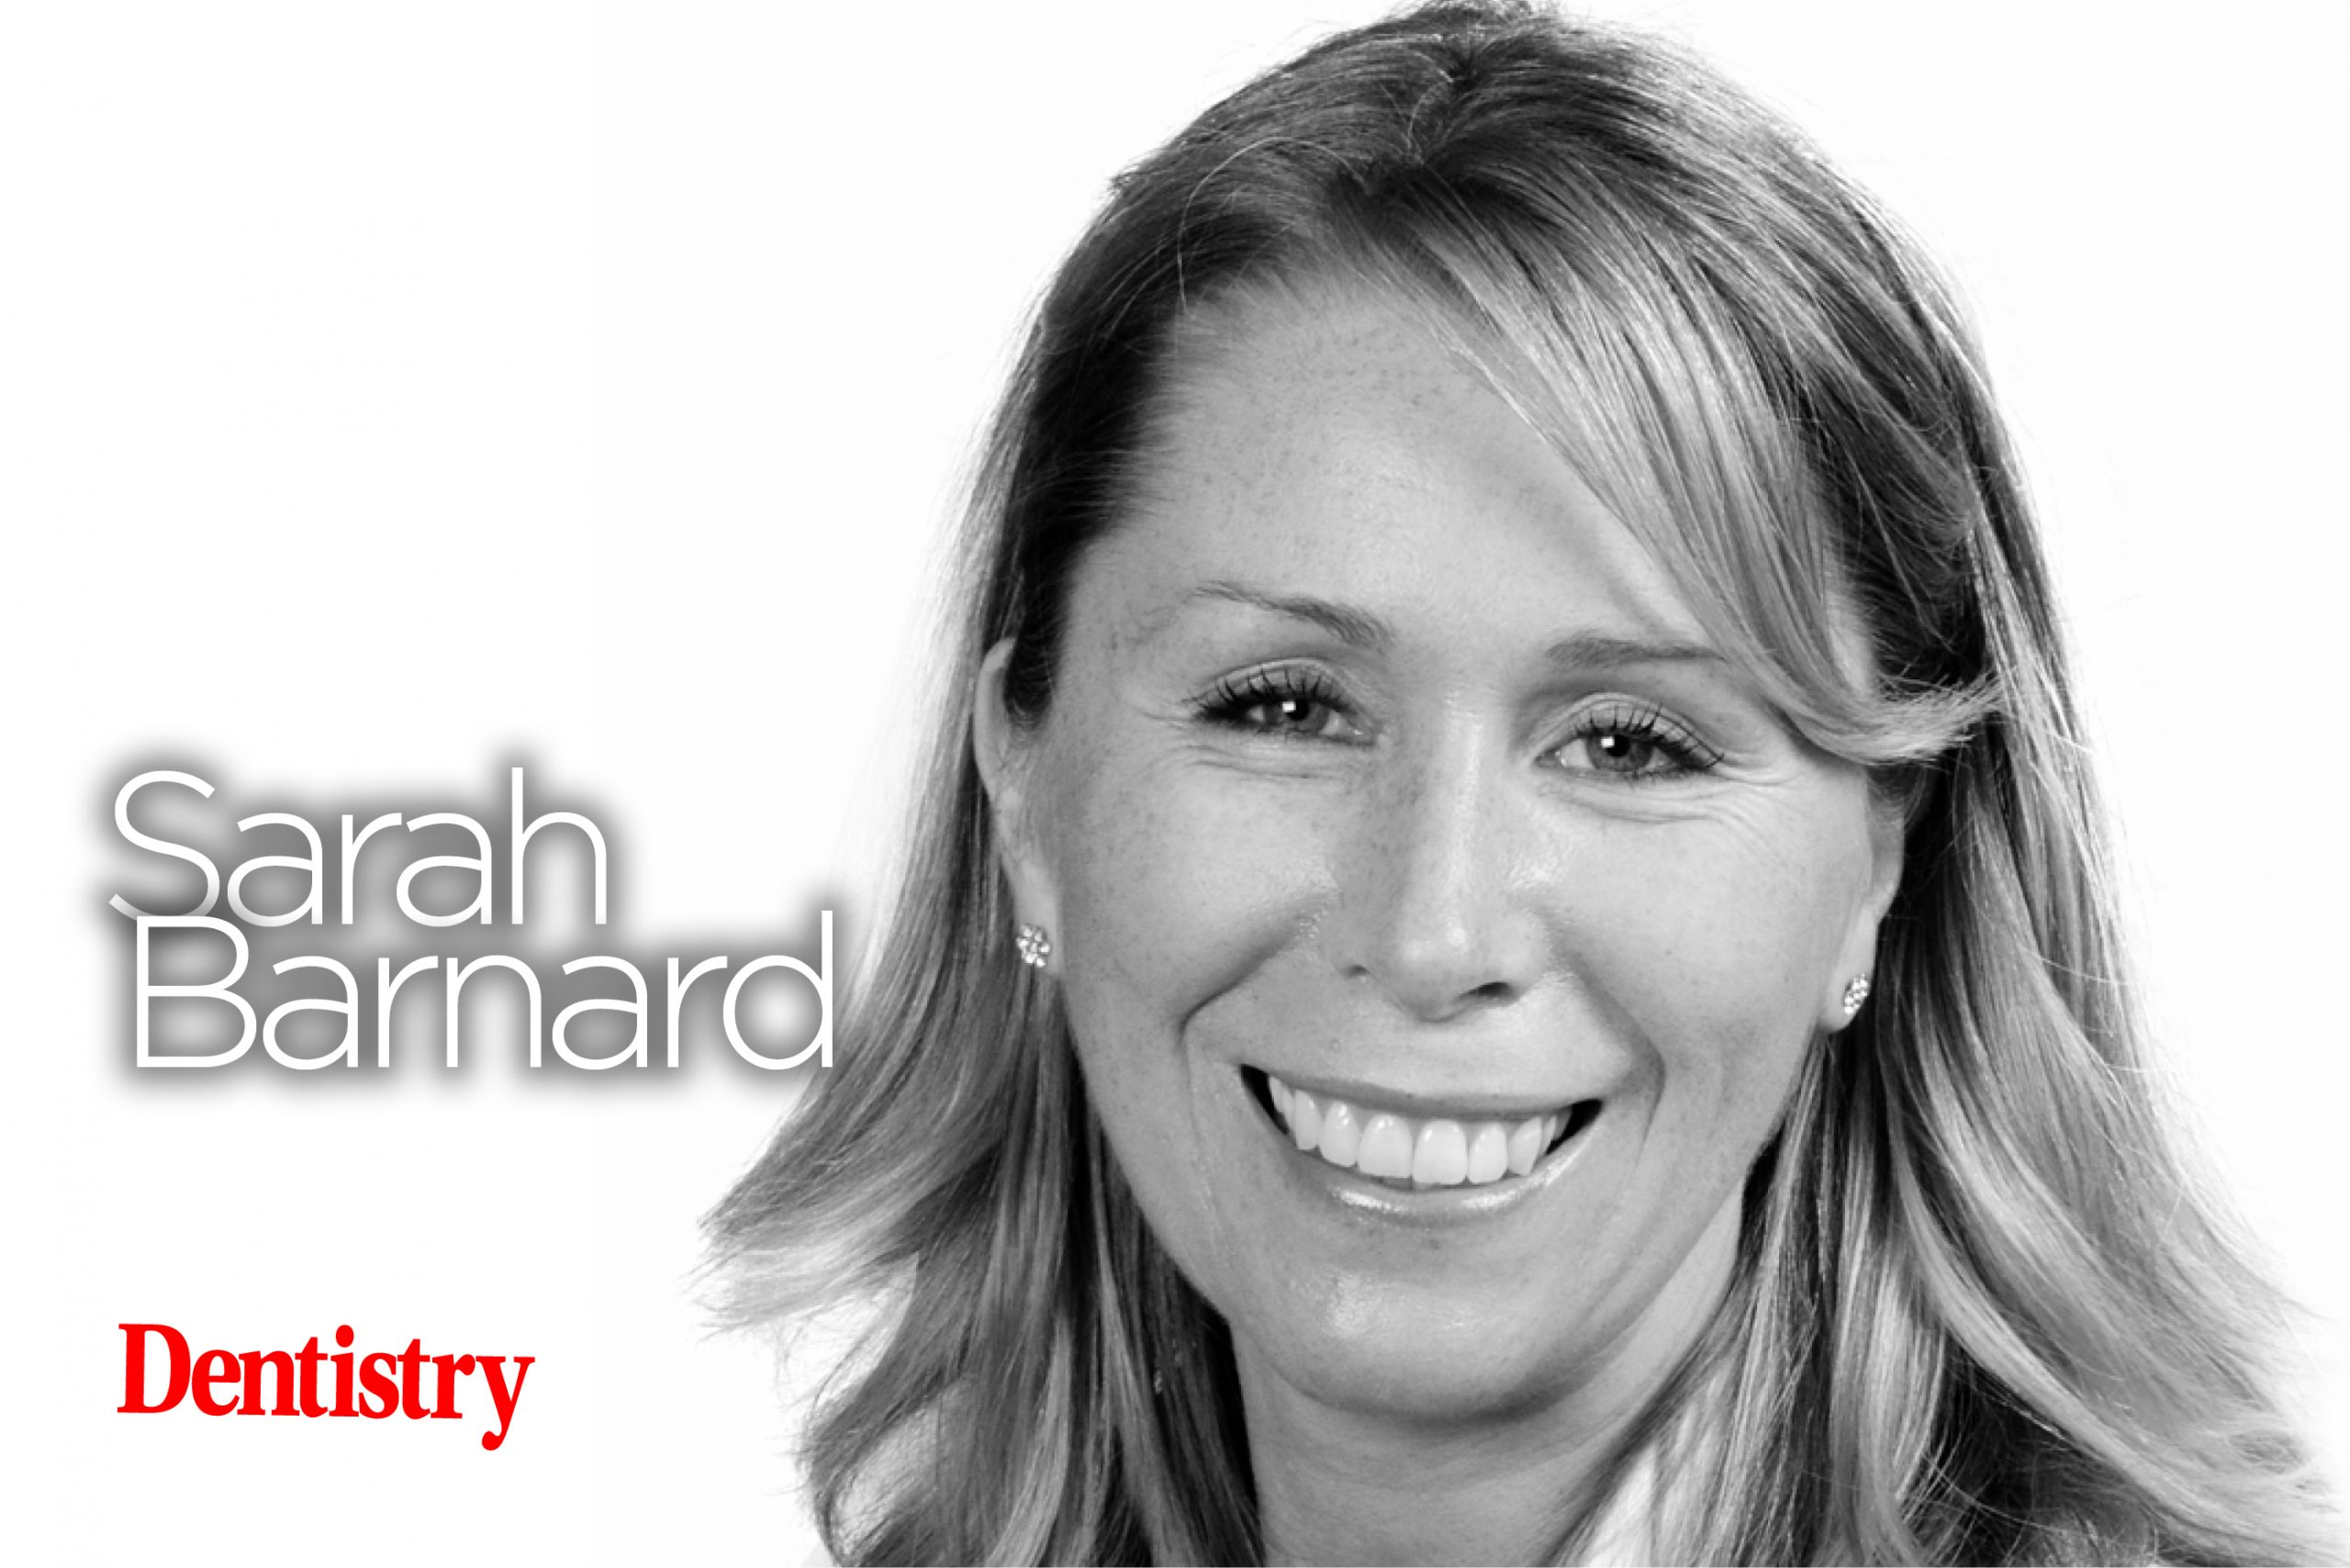 Dentistry podcast – Sarah Barnard on future-proofing your practice